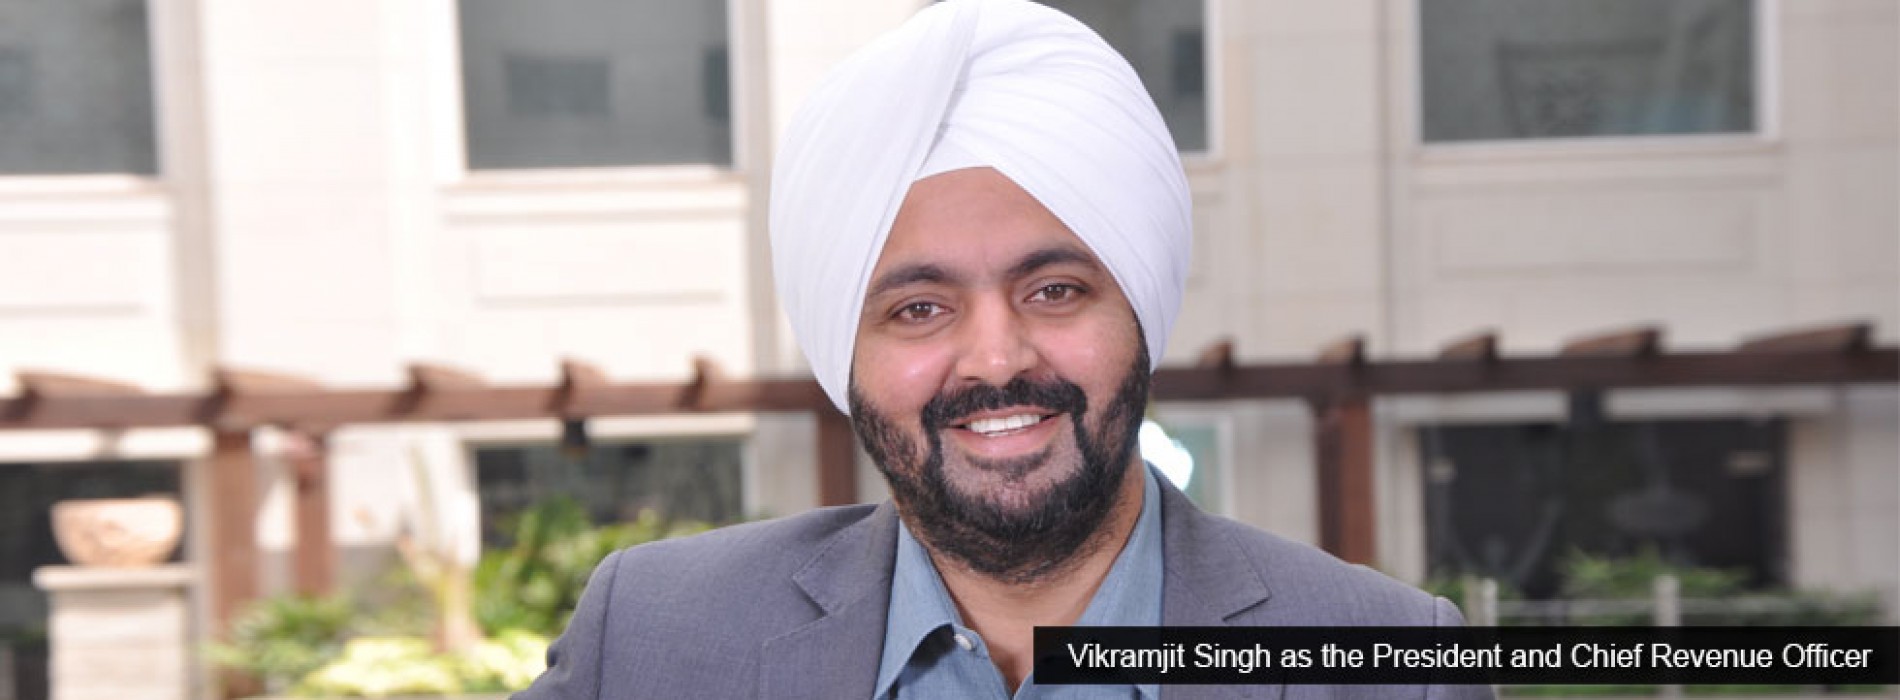 Lemon Tree Hotel Company appoints Vikramjit Singh as President and Chief Revenue Officer